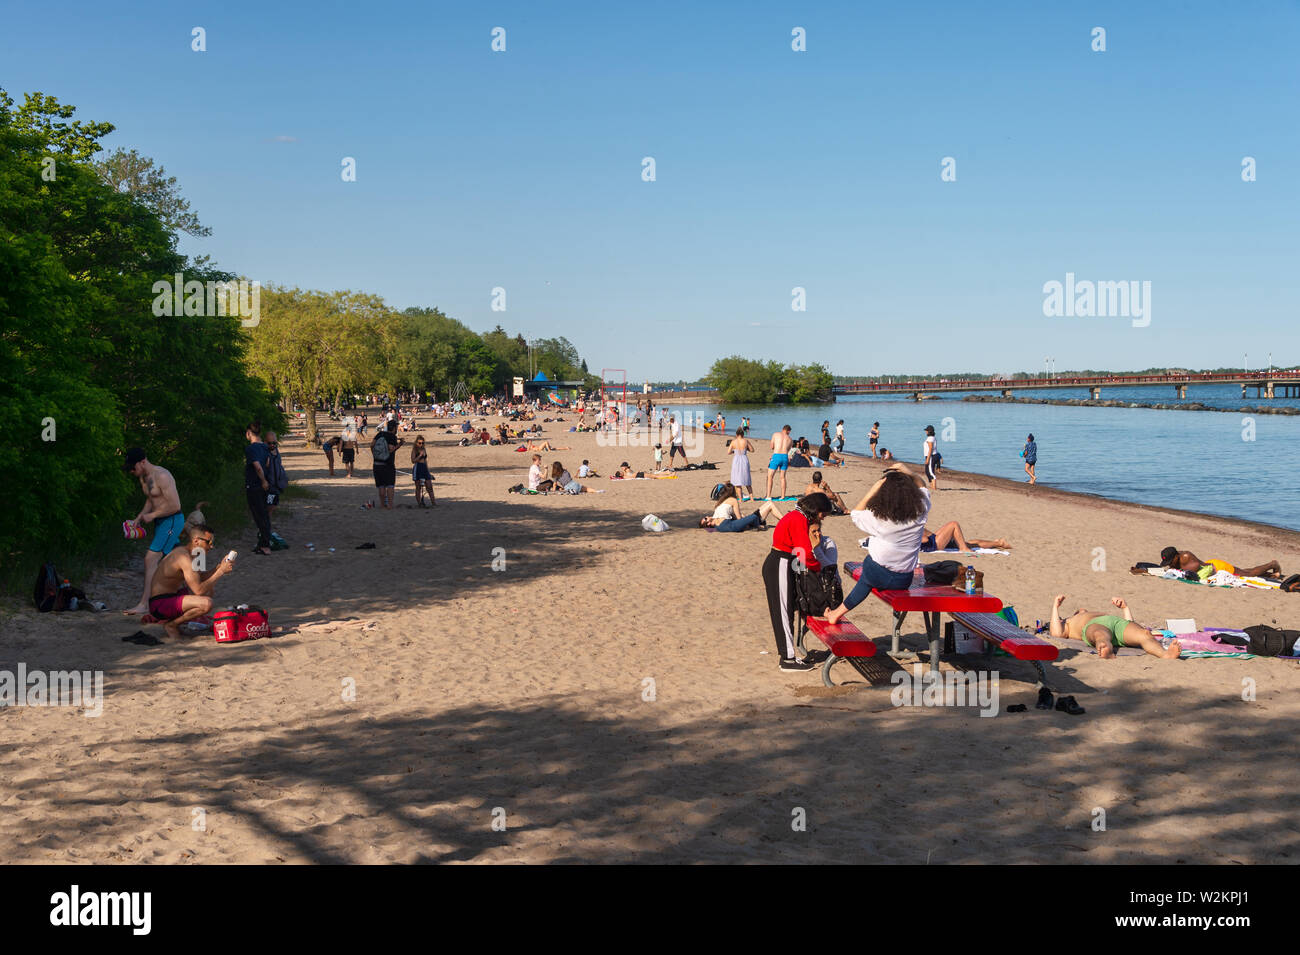 Toronto, CA - 23 June 2019: People enjoying a warm summer day at the beach on Centre island. Stock Photo